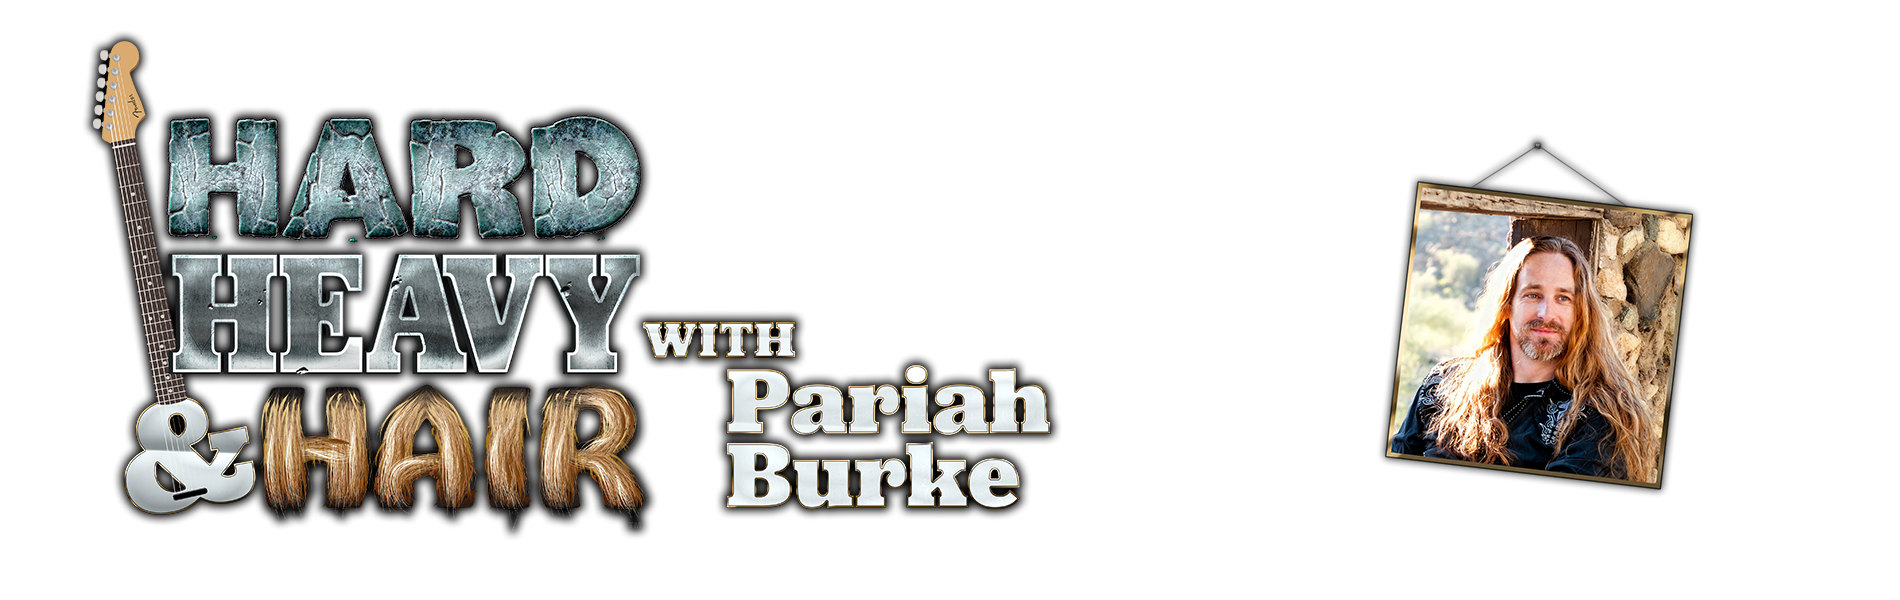 The Hard, Heavy & Hair Show with Pariah Burke, Radio for True Fans of Heavy Rock